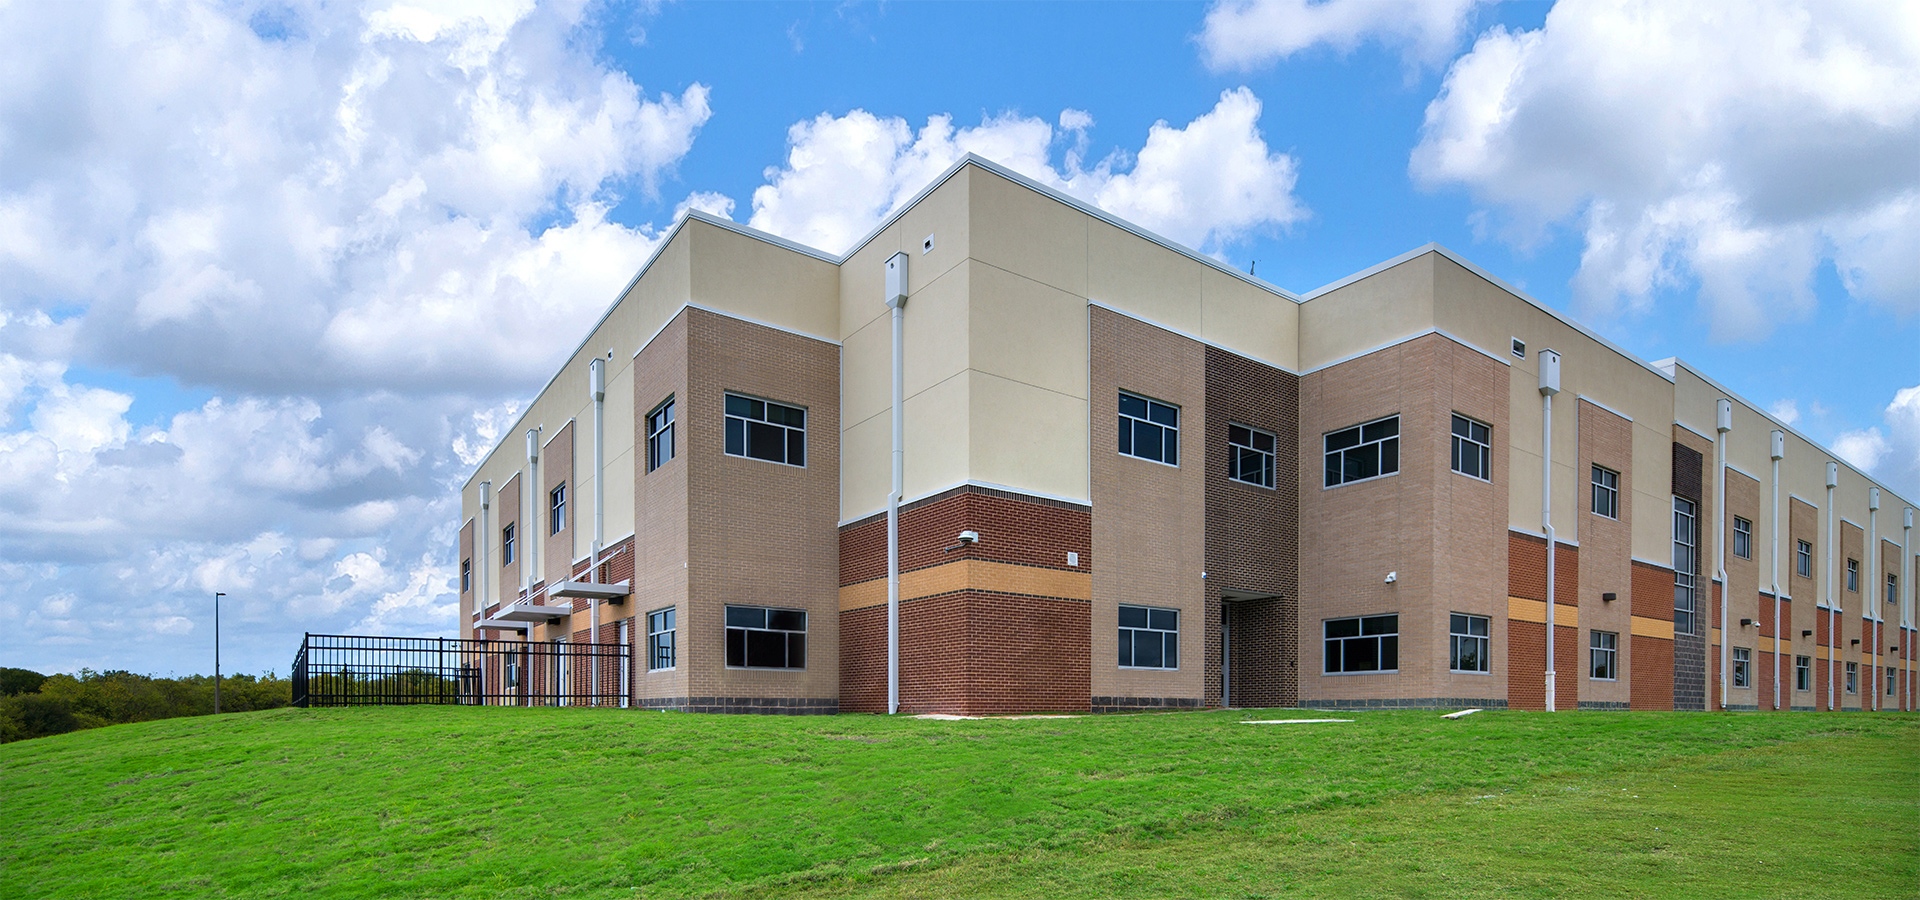 McMillan Junior High addition completed in 2021